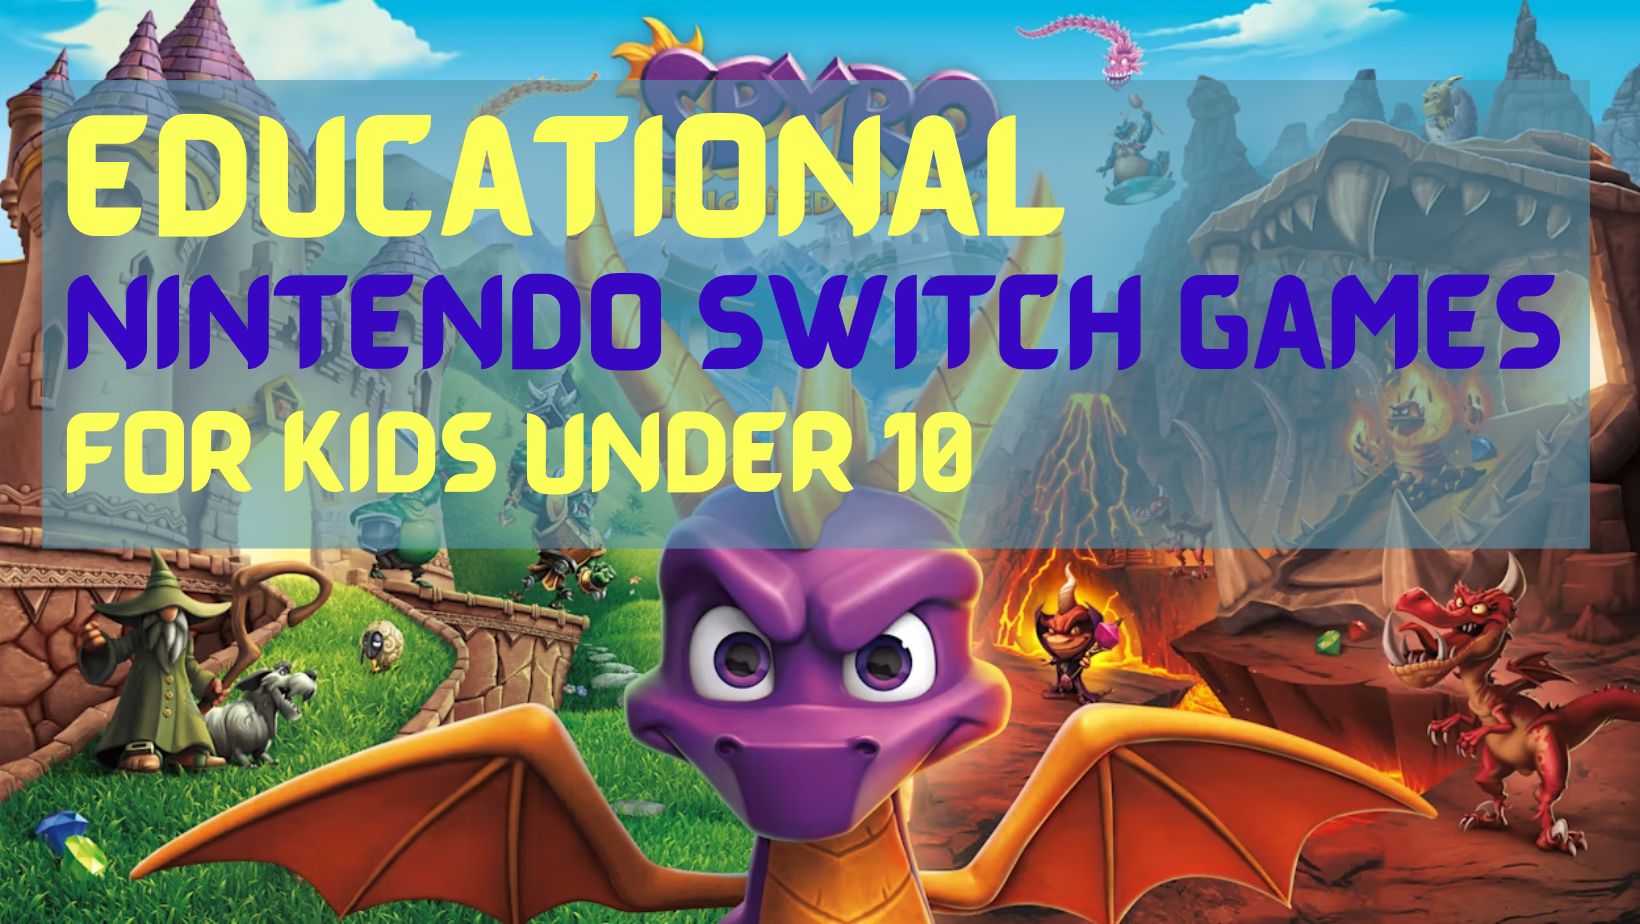 Gaming for Growth: Educational Nintendo Switch Games for Kids Under 10